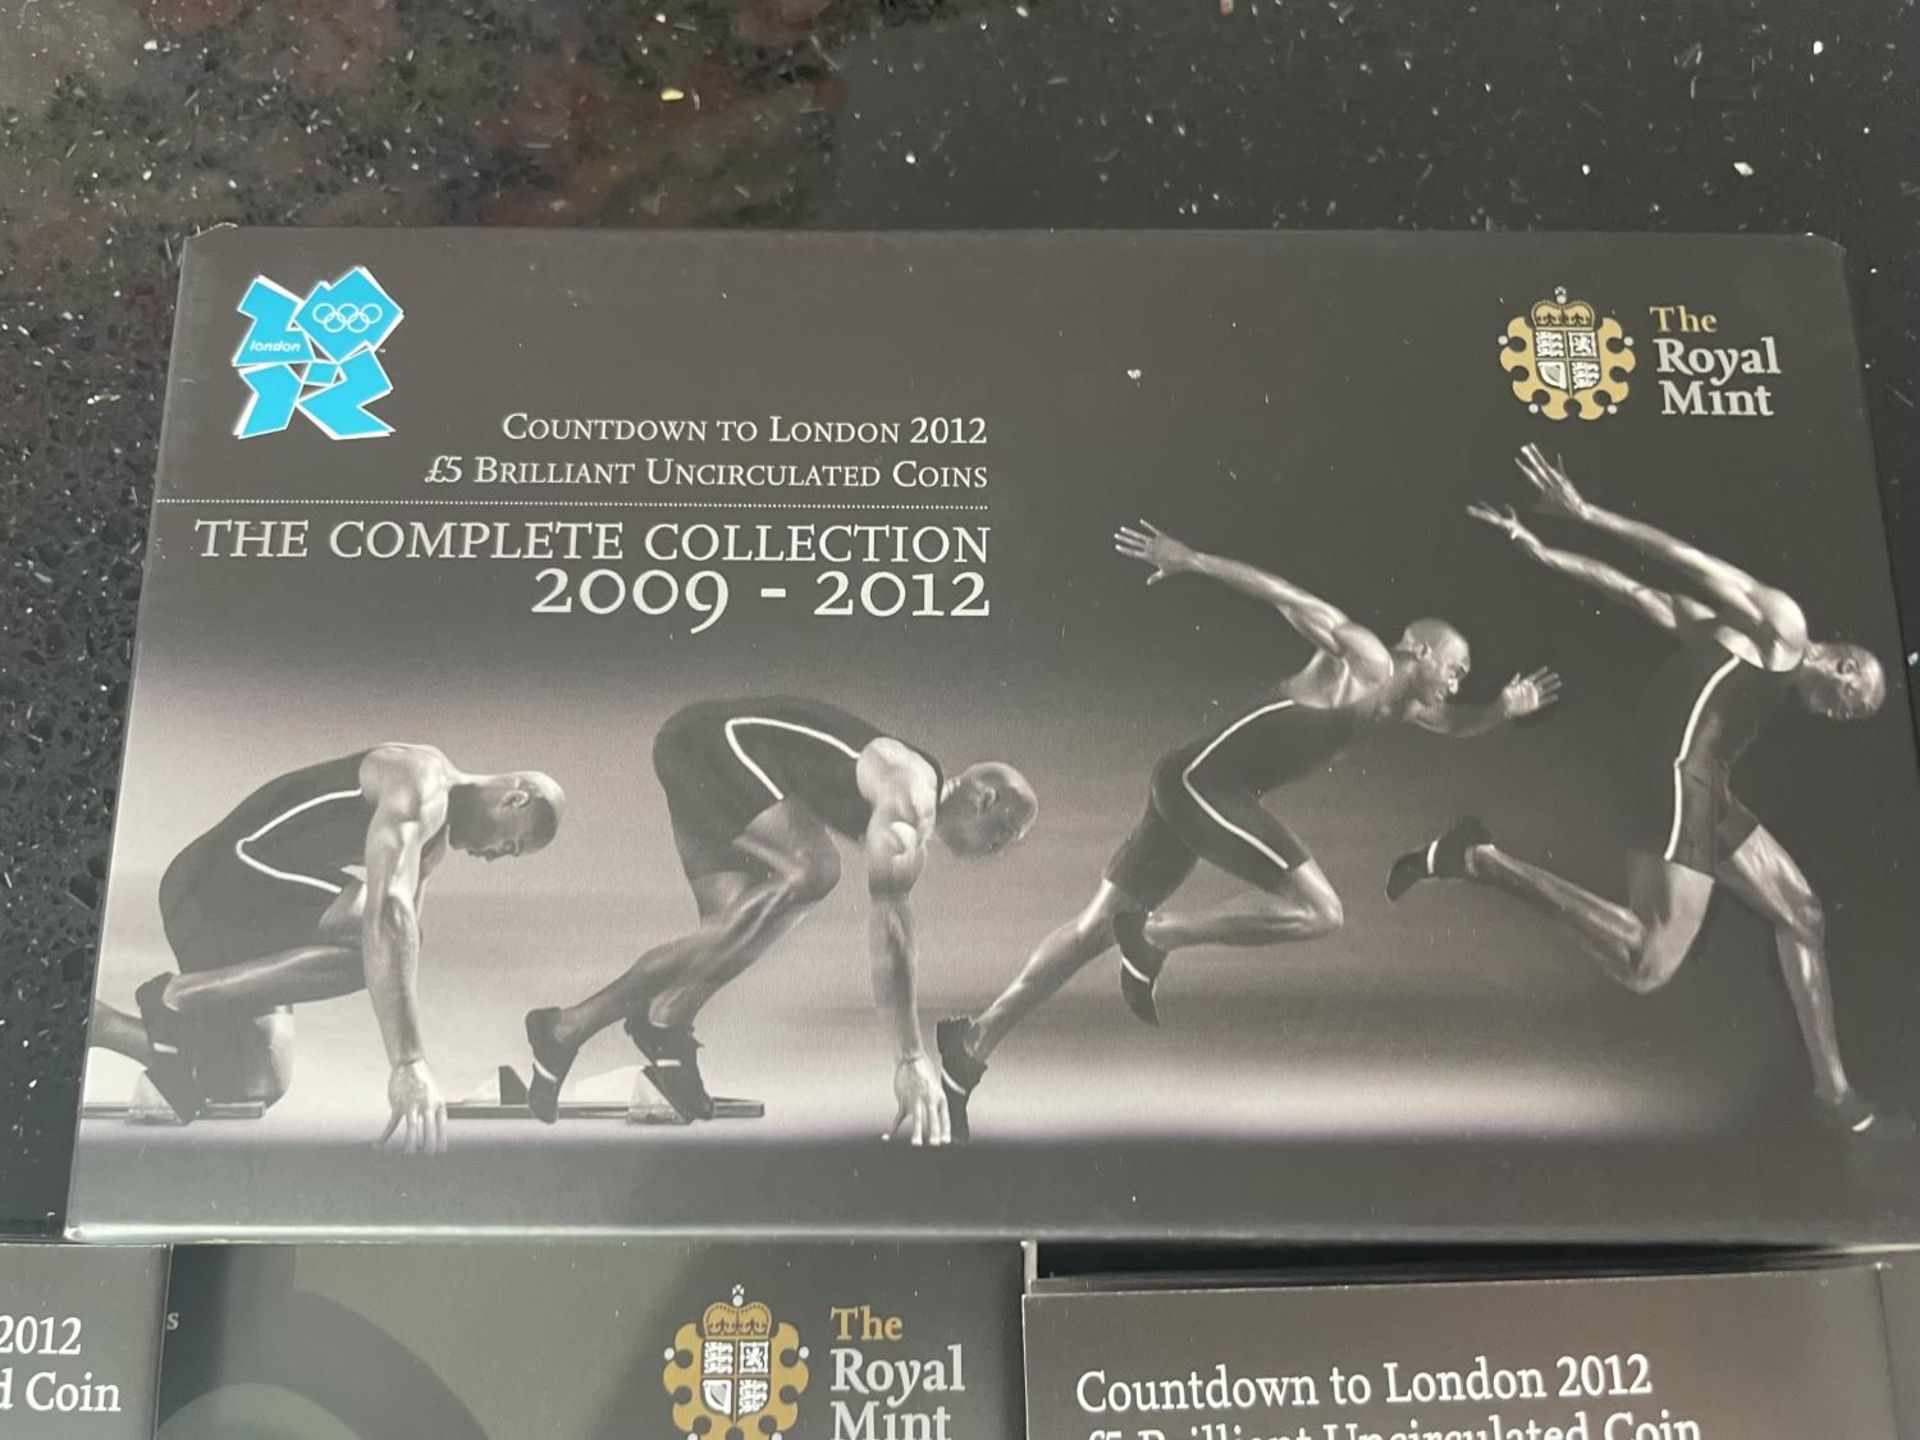 THE COMPLETE COLLECTION “COUNTDOWN LONDON 2012” 4 X £5 BRILLIANT, UNCIRCULATED COINS - Image 3 of 8